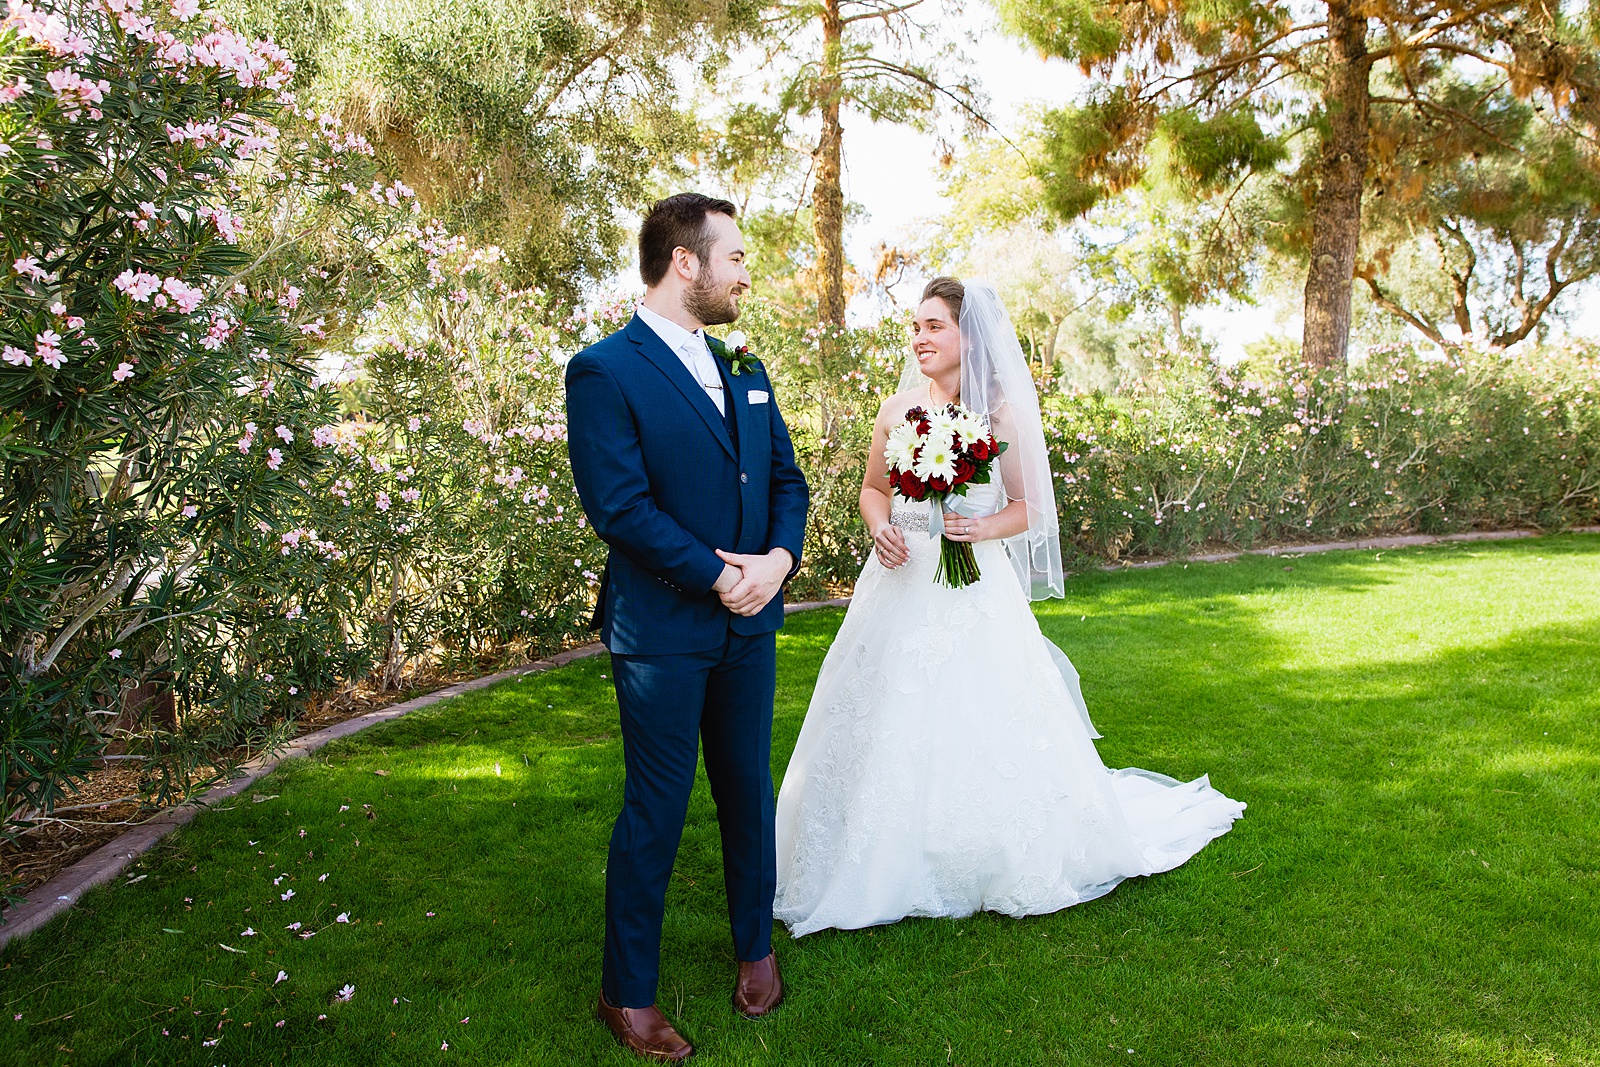 Bride and Groom's first look at Ocotillo Oasis by Phoenix wedding photographer PMA Photography.